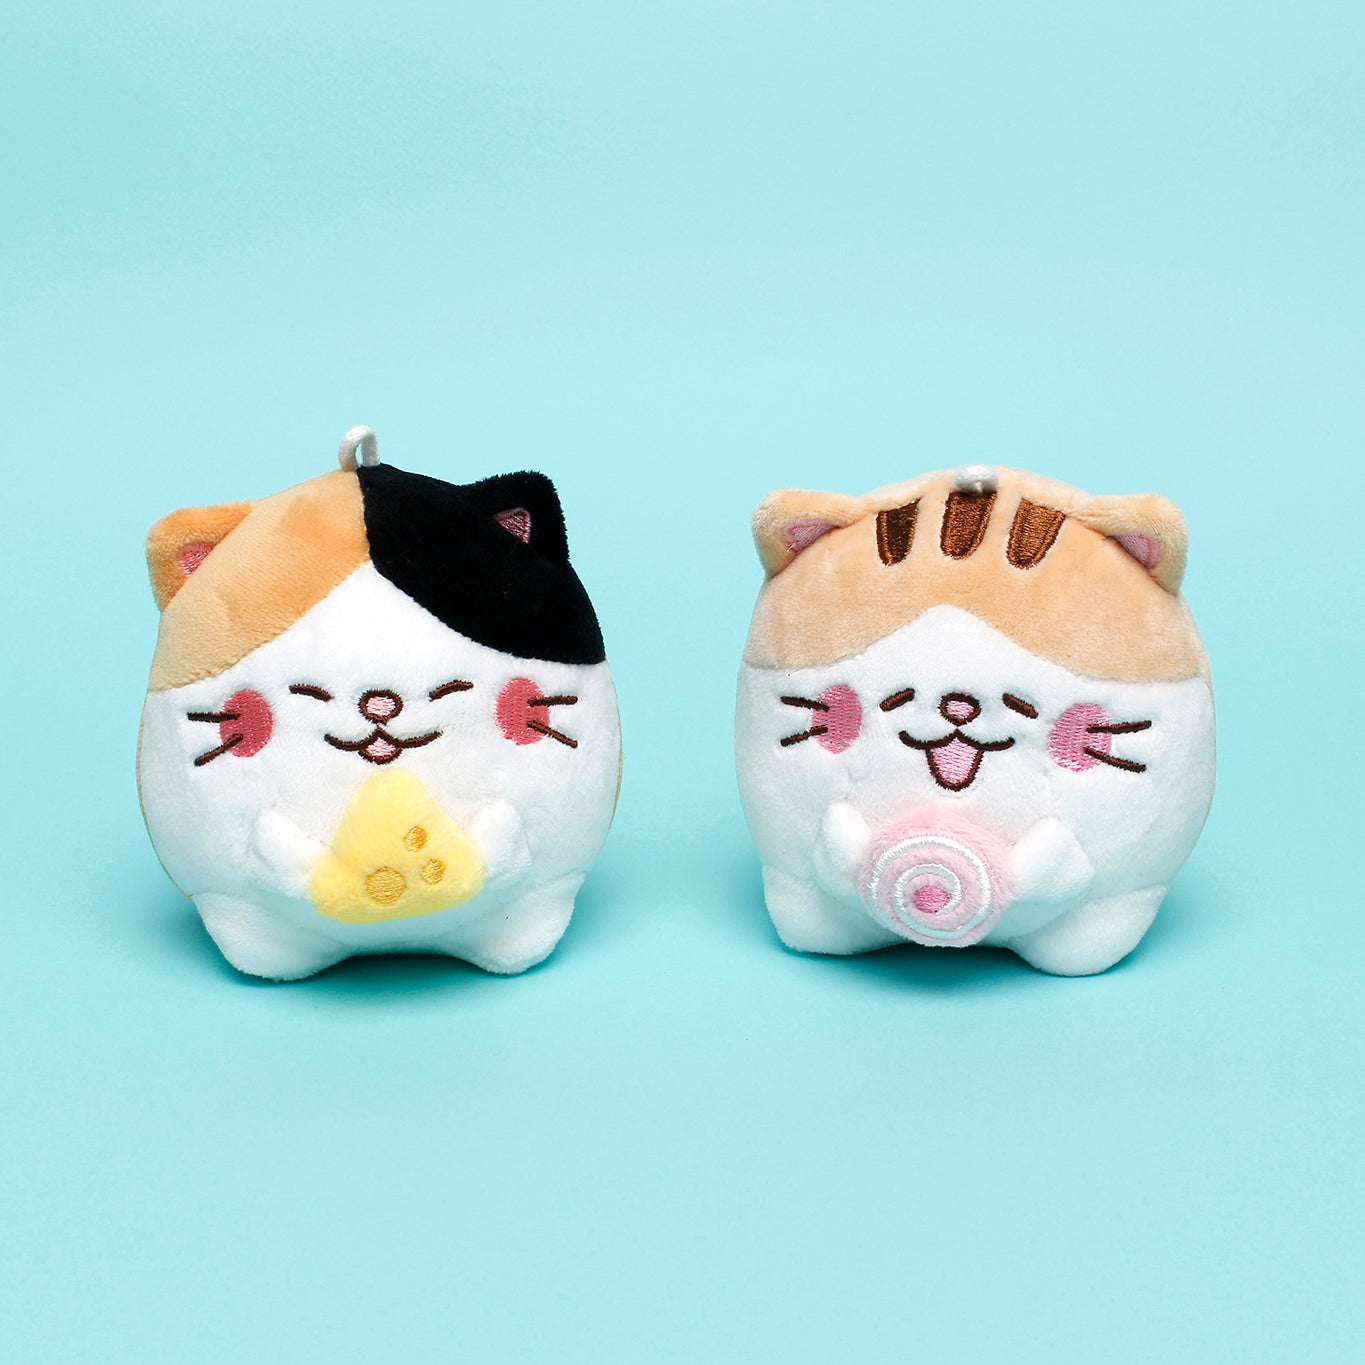 Two keyring cats sit together on teal background.